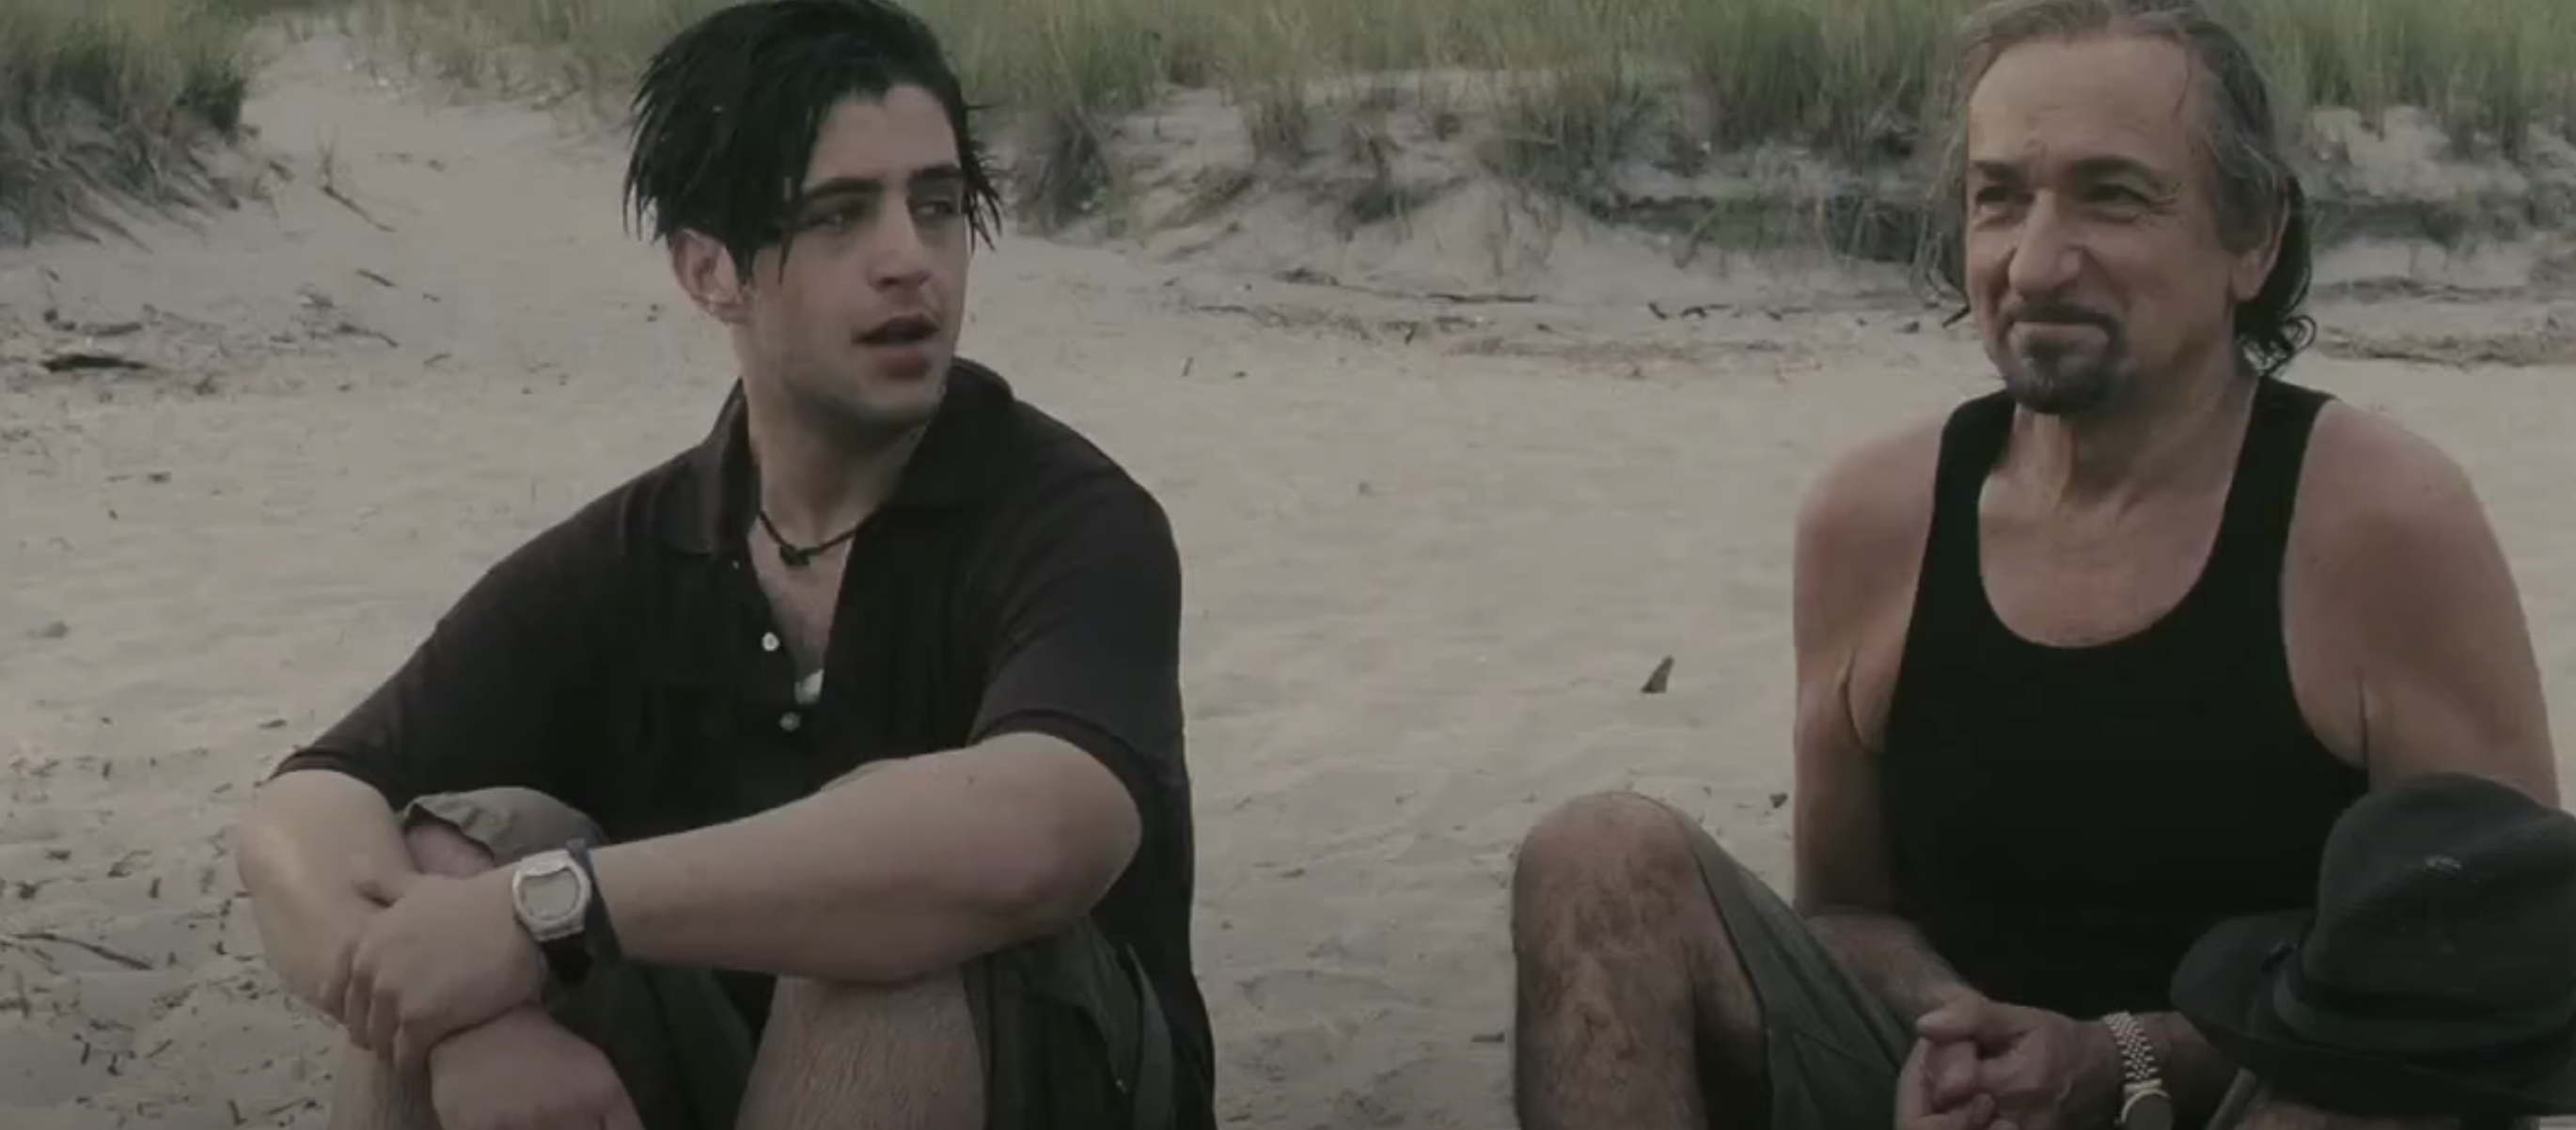 Josh Peck and Ben Kingsley on the beach in The Wackness